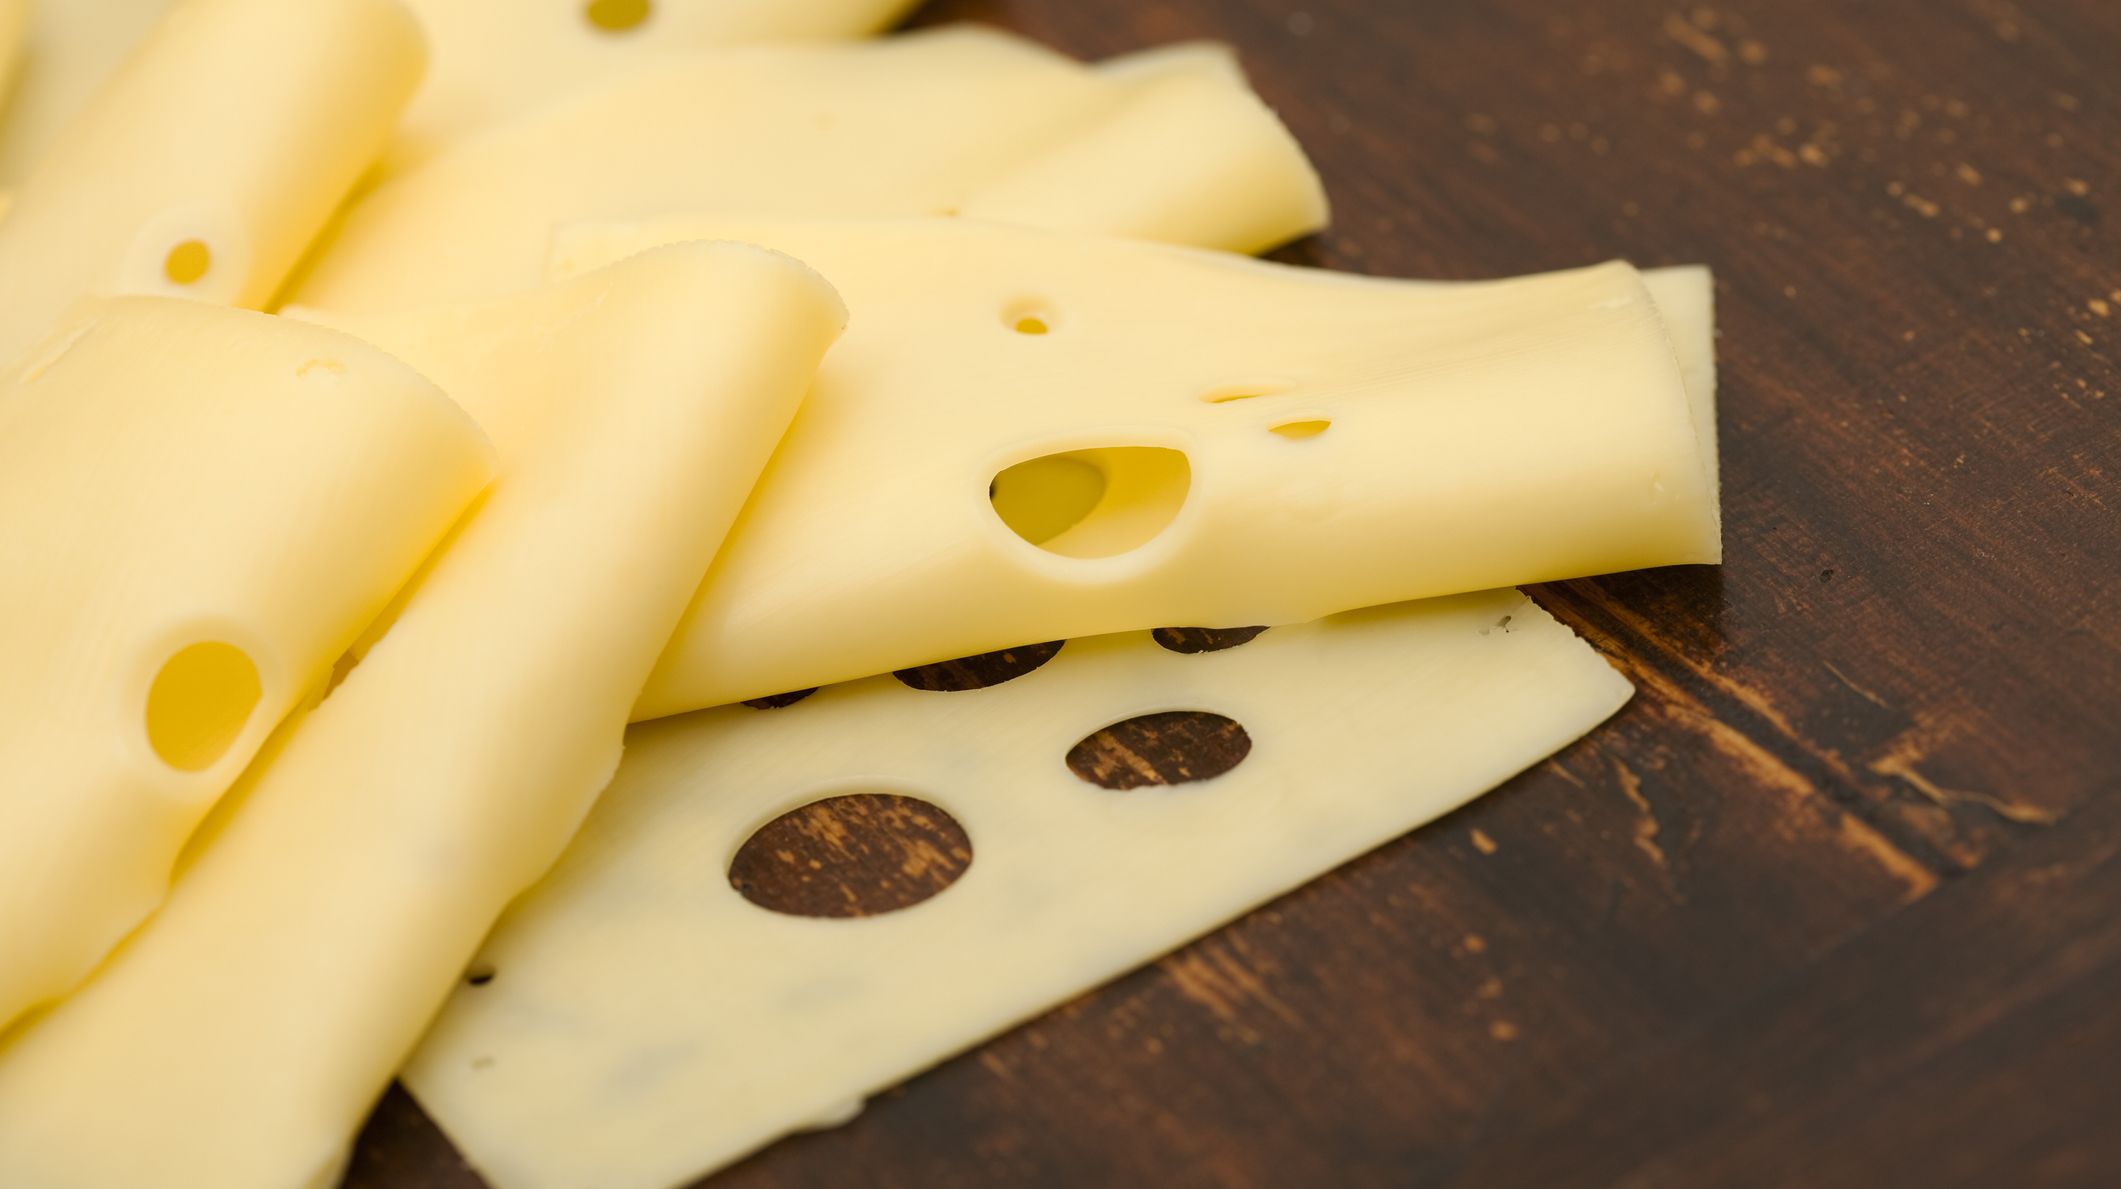 Why Does Swiss Cheese Have Holes? Mental Floss